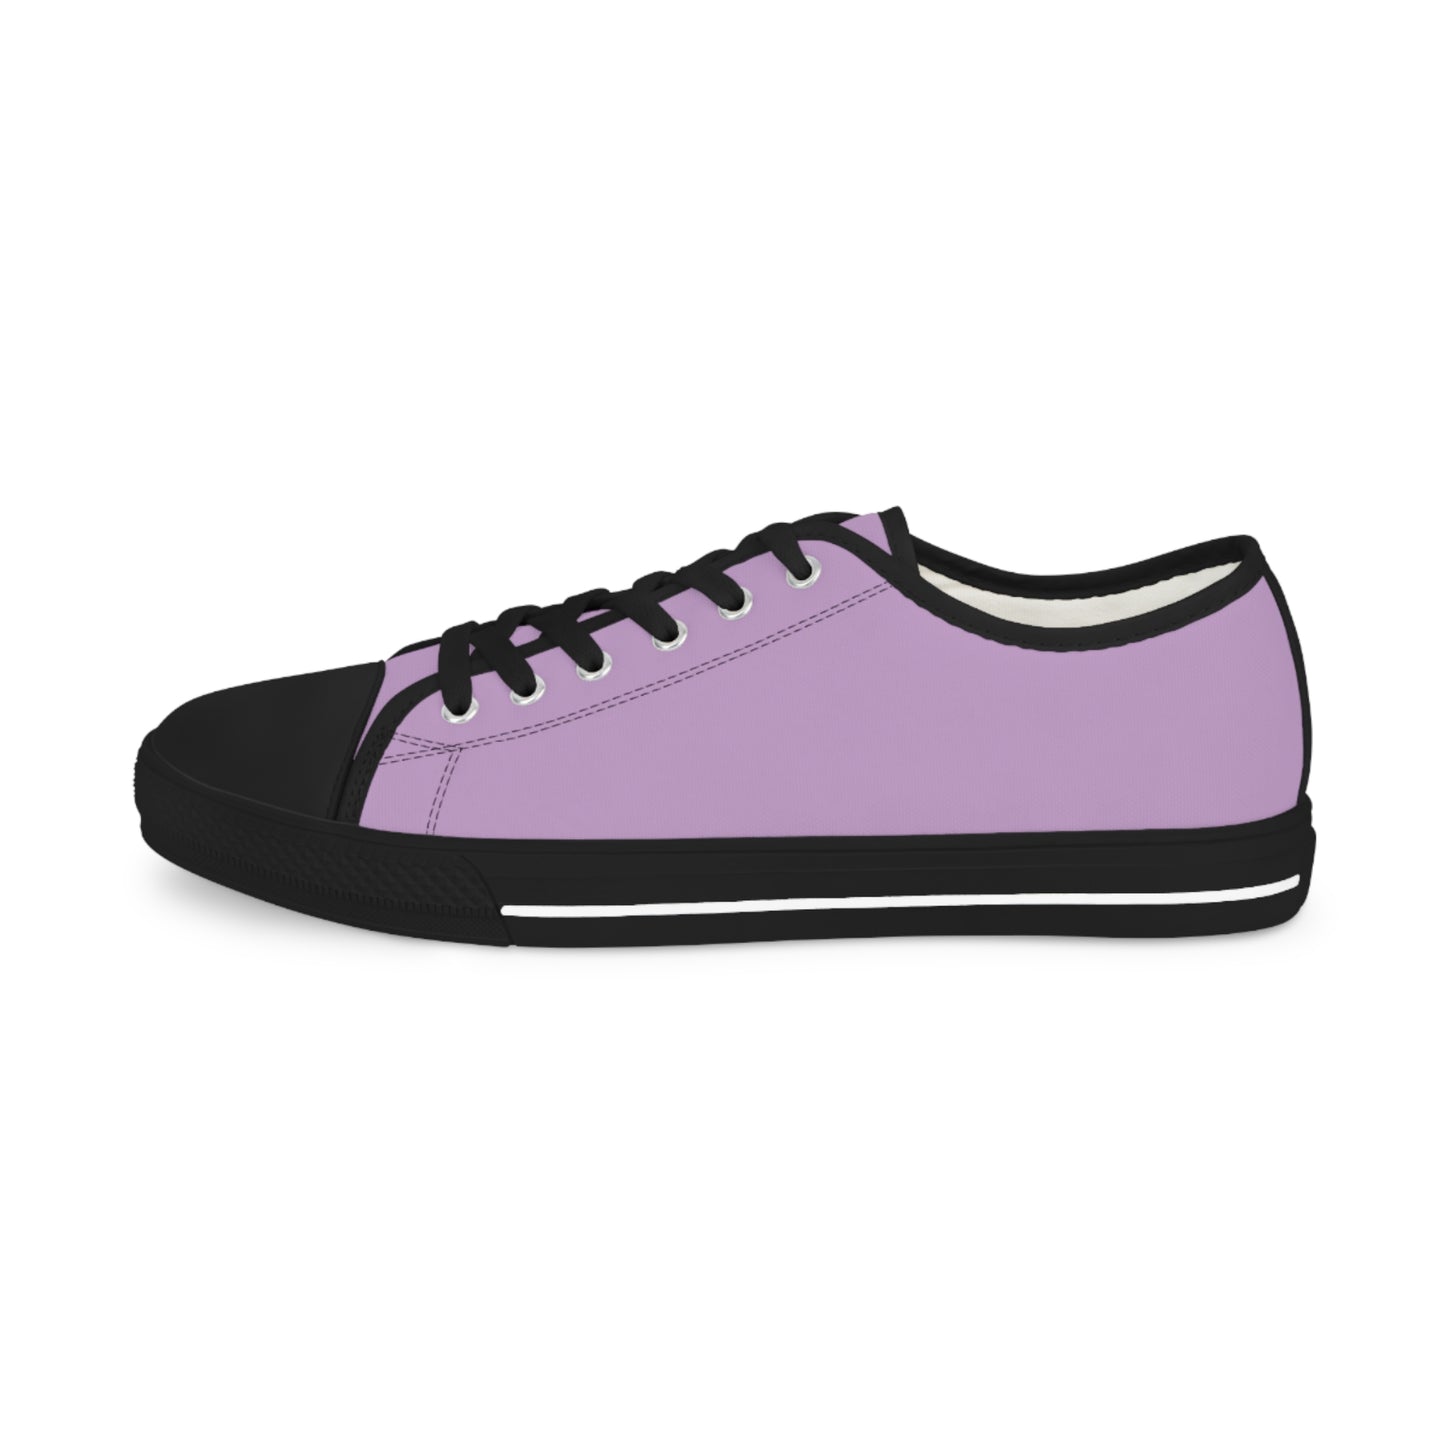 Men's Canvas Low Top Solid Color Sneakers - Pinky Purple US 14 Black sole